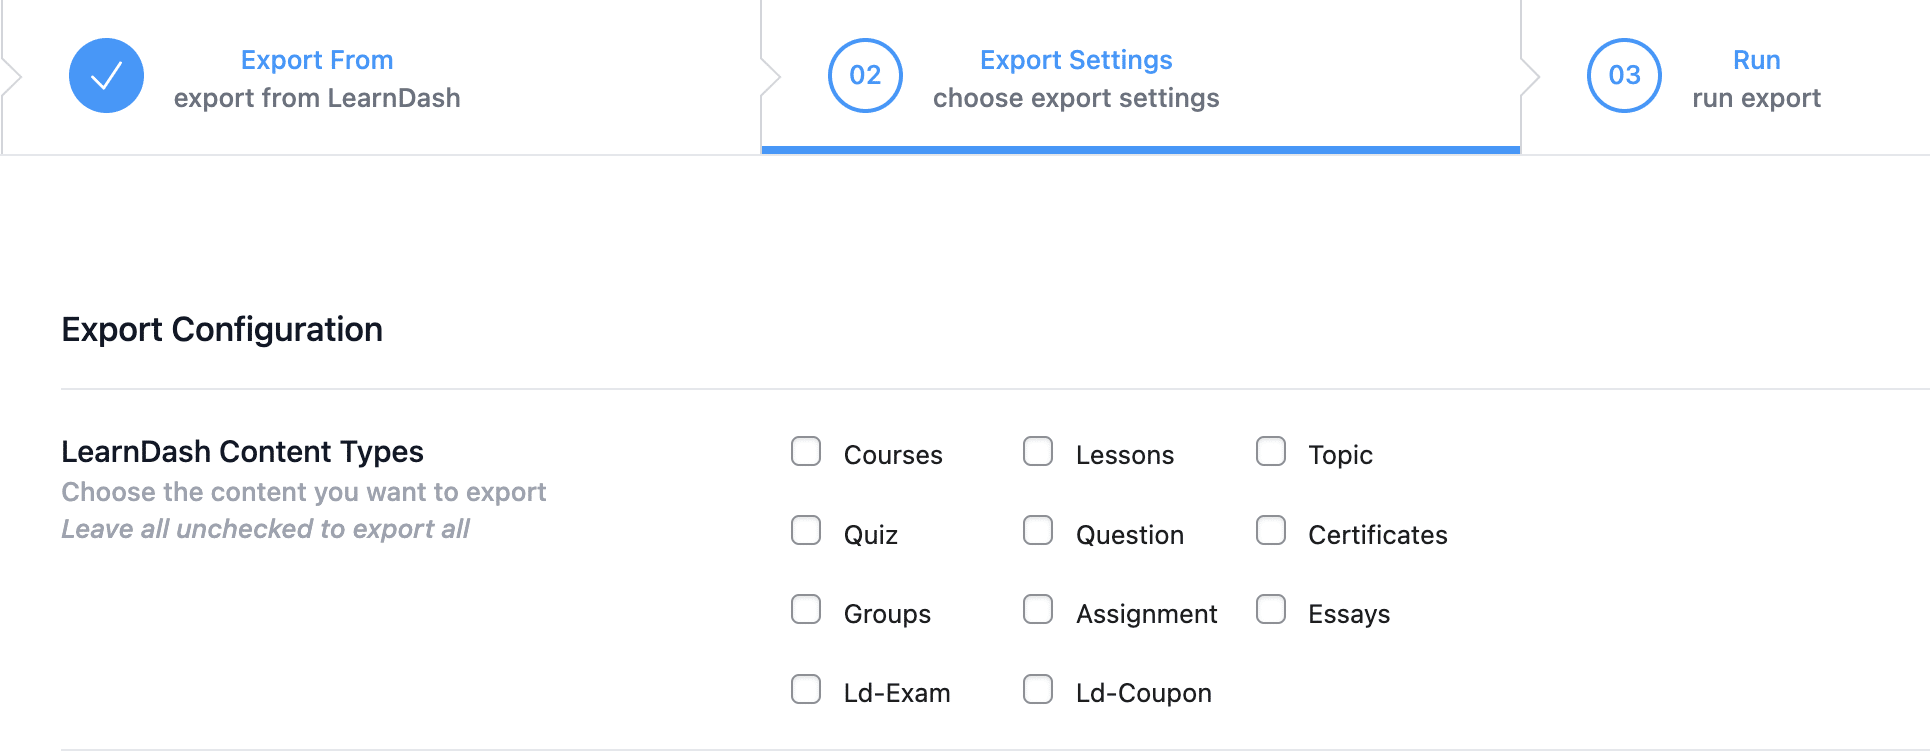 LearnDash export settings and LearnDash content types selections.